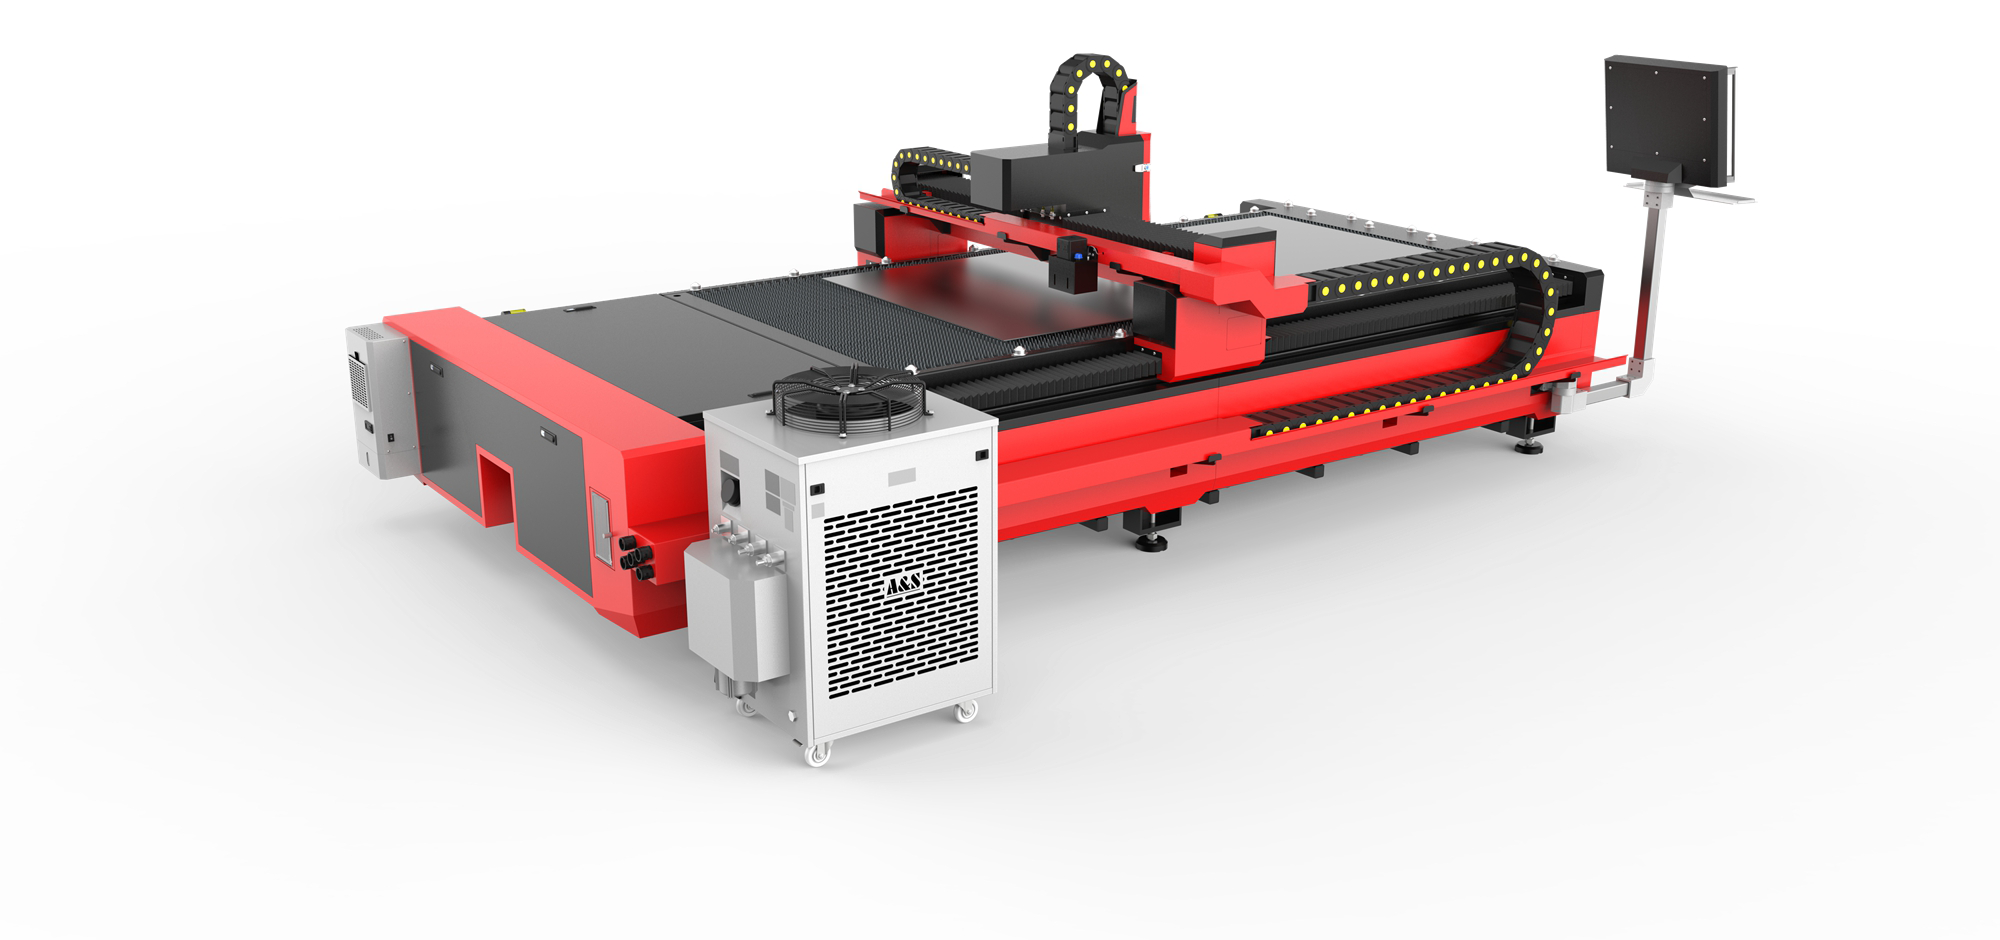 Best-Selling China 7% Price off Lx62th Manufacturer Outlet 1000W Metal Tube Fiber Laser Cut Machine / Metal Pipe Fiber Laser Cut Machine Featured Image